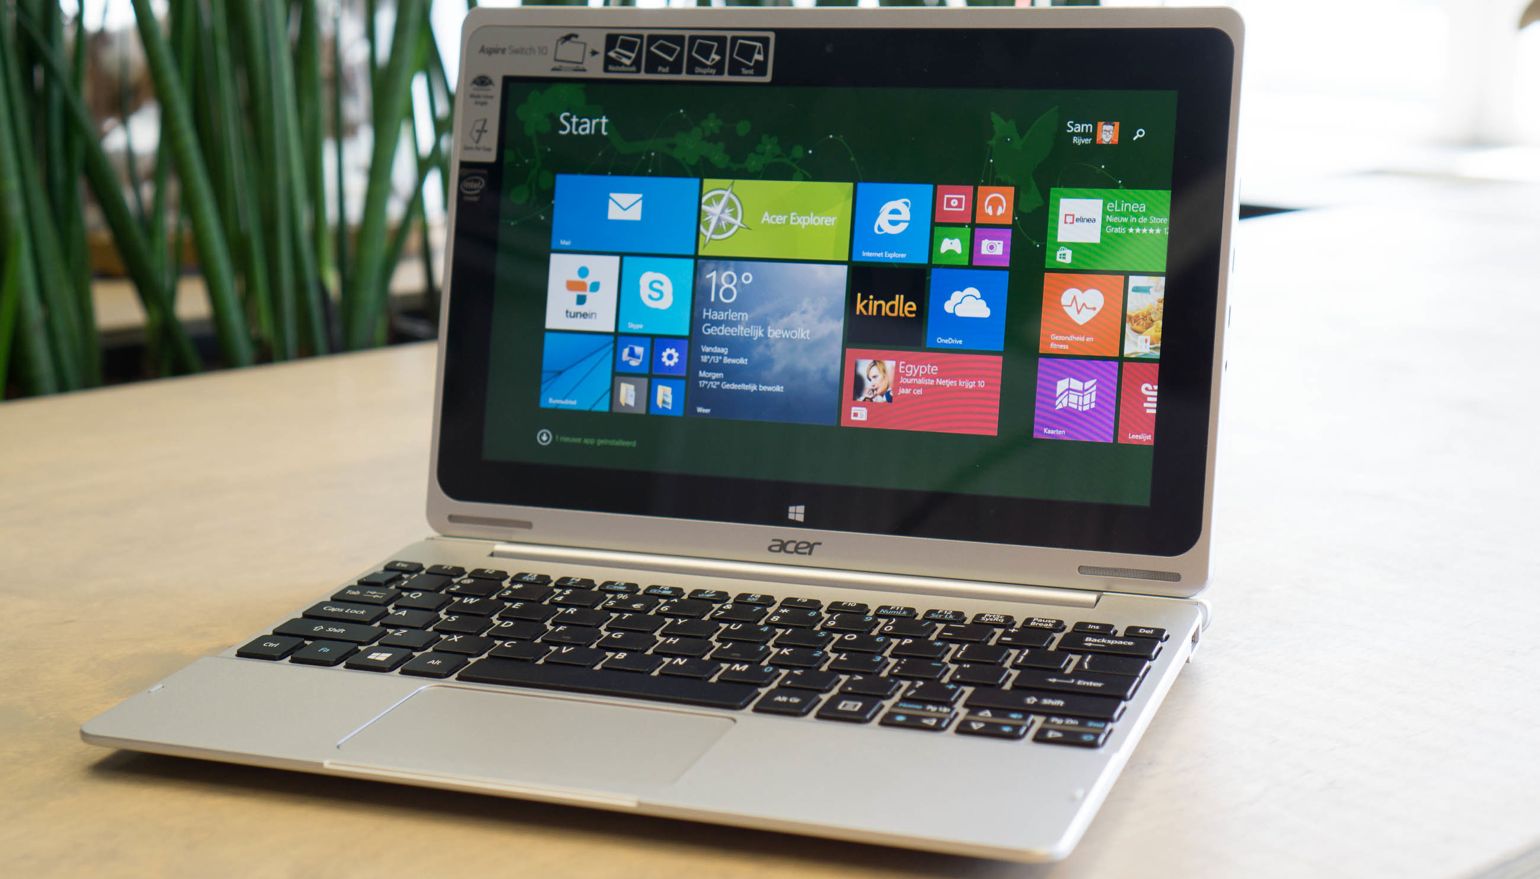 Sortie Michelangelo Lounge Review: Acer Aspire Switch 10 | FWD